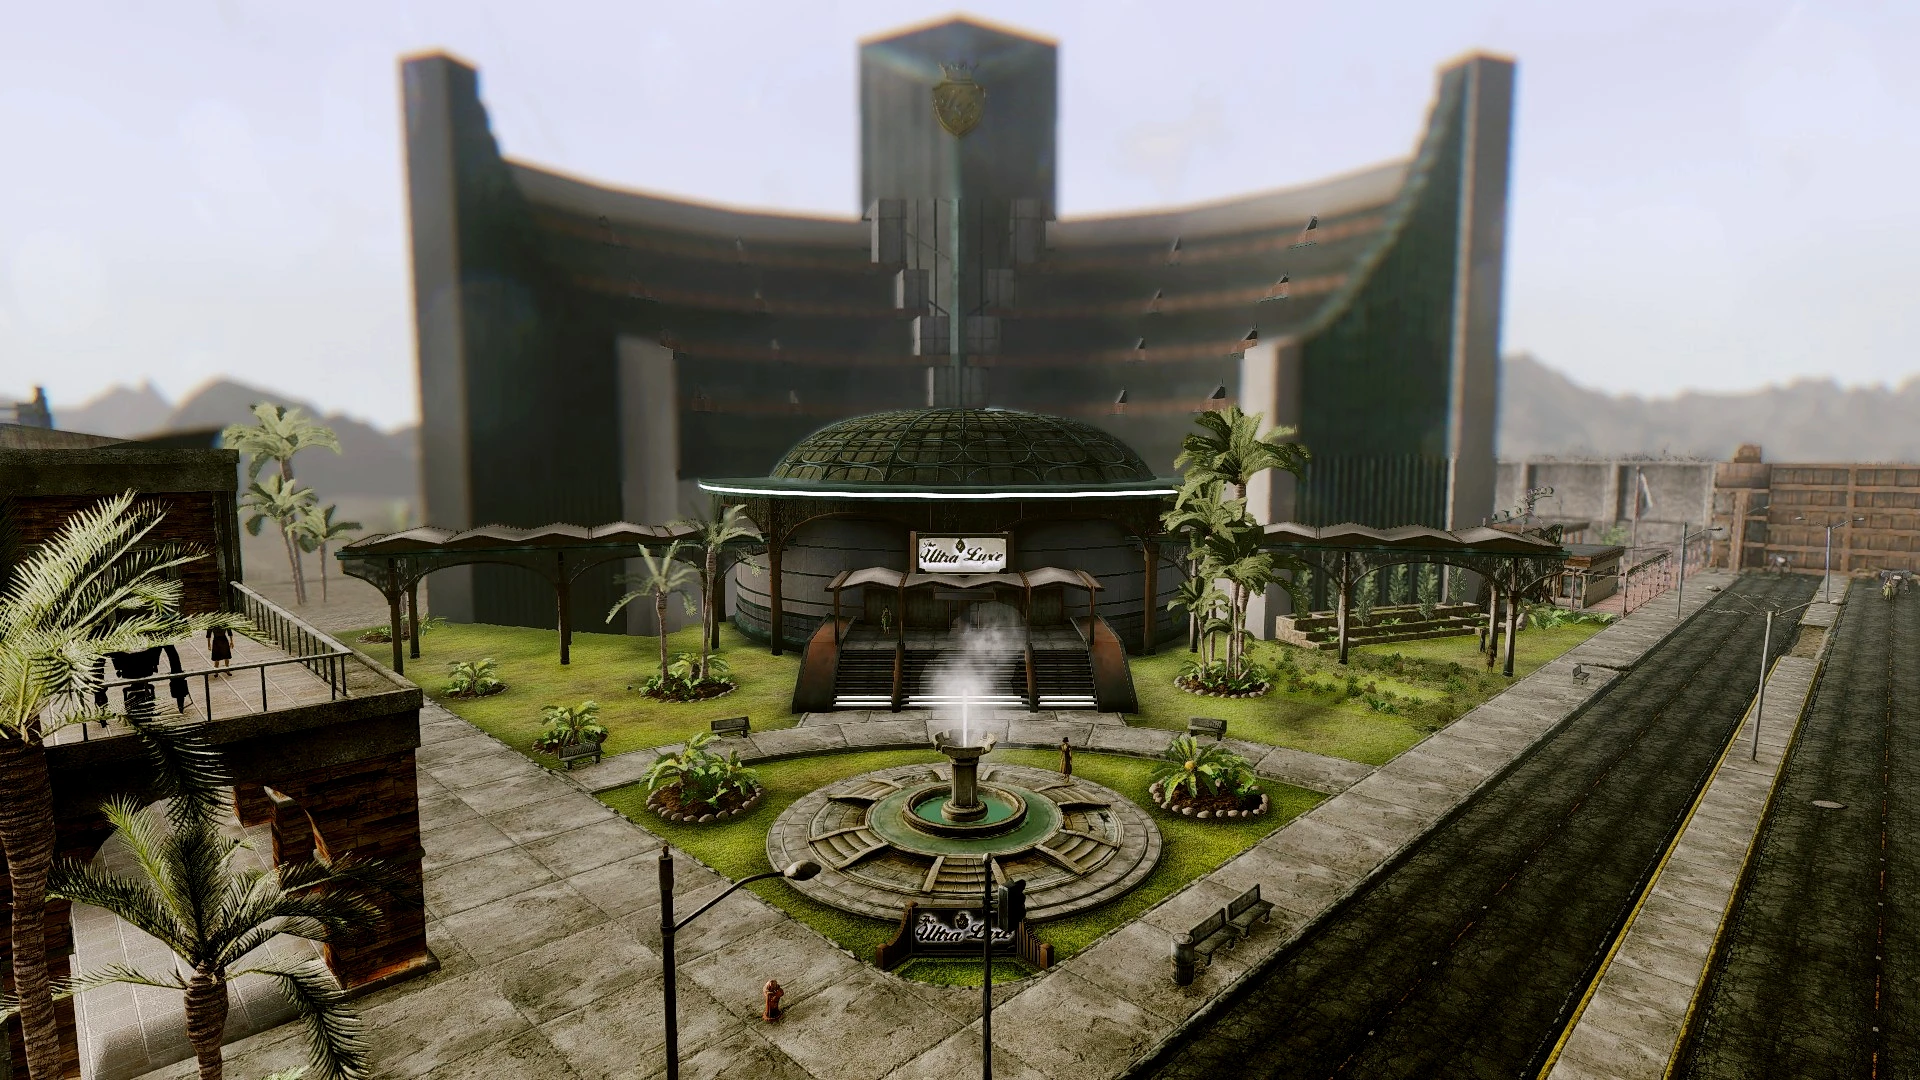 Ultraluxe Awnings and Fountain at Fallout New Vegas - mods and community